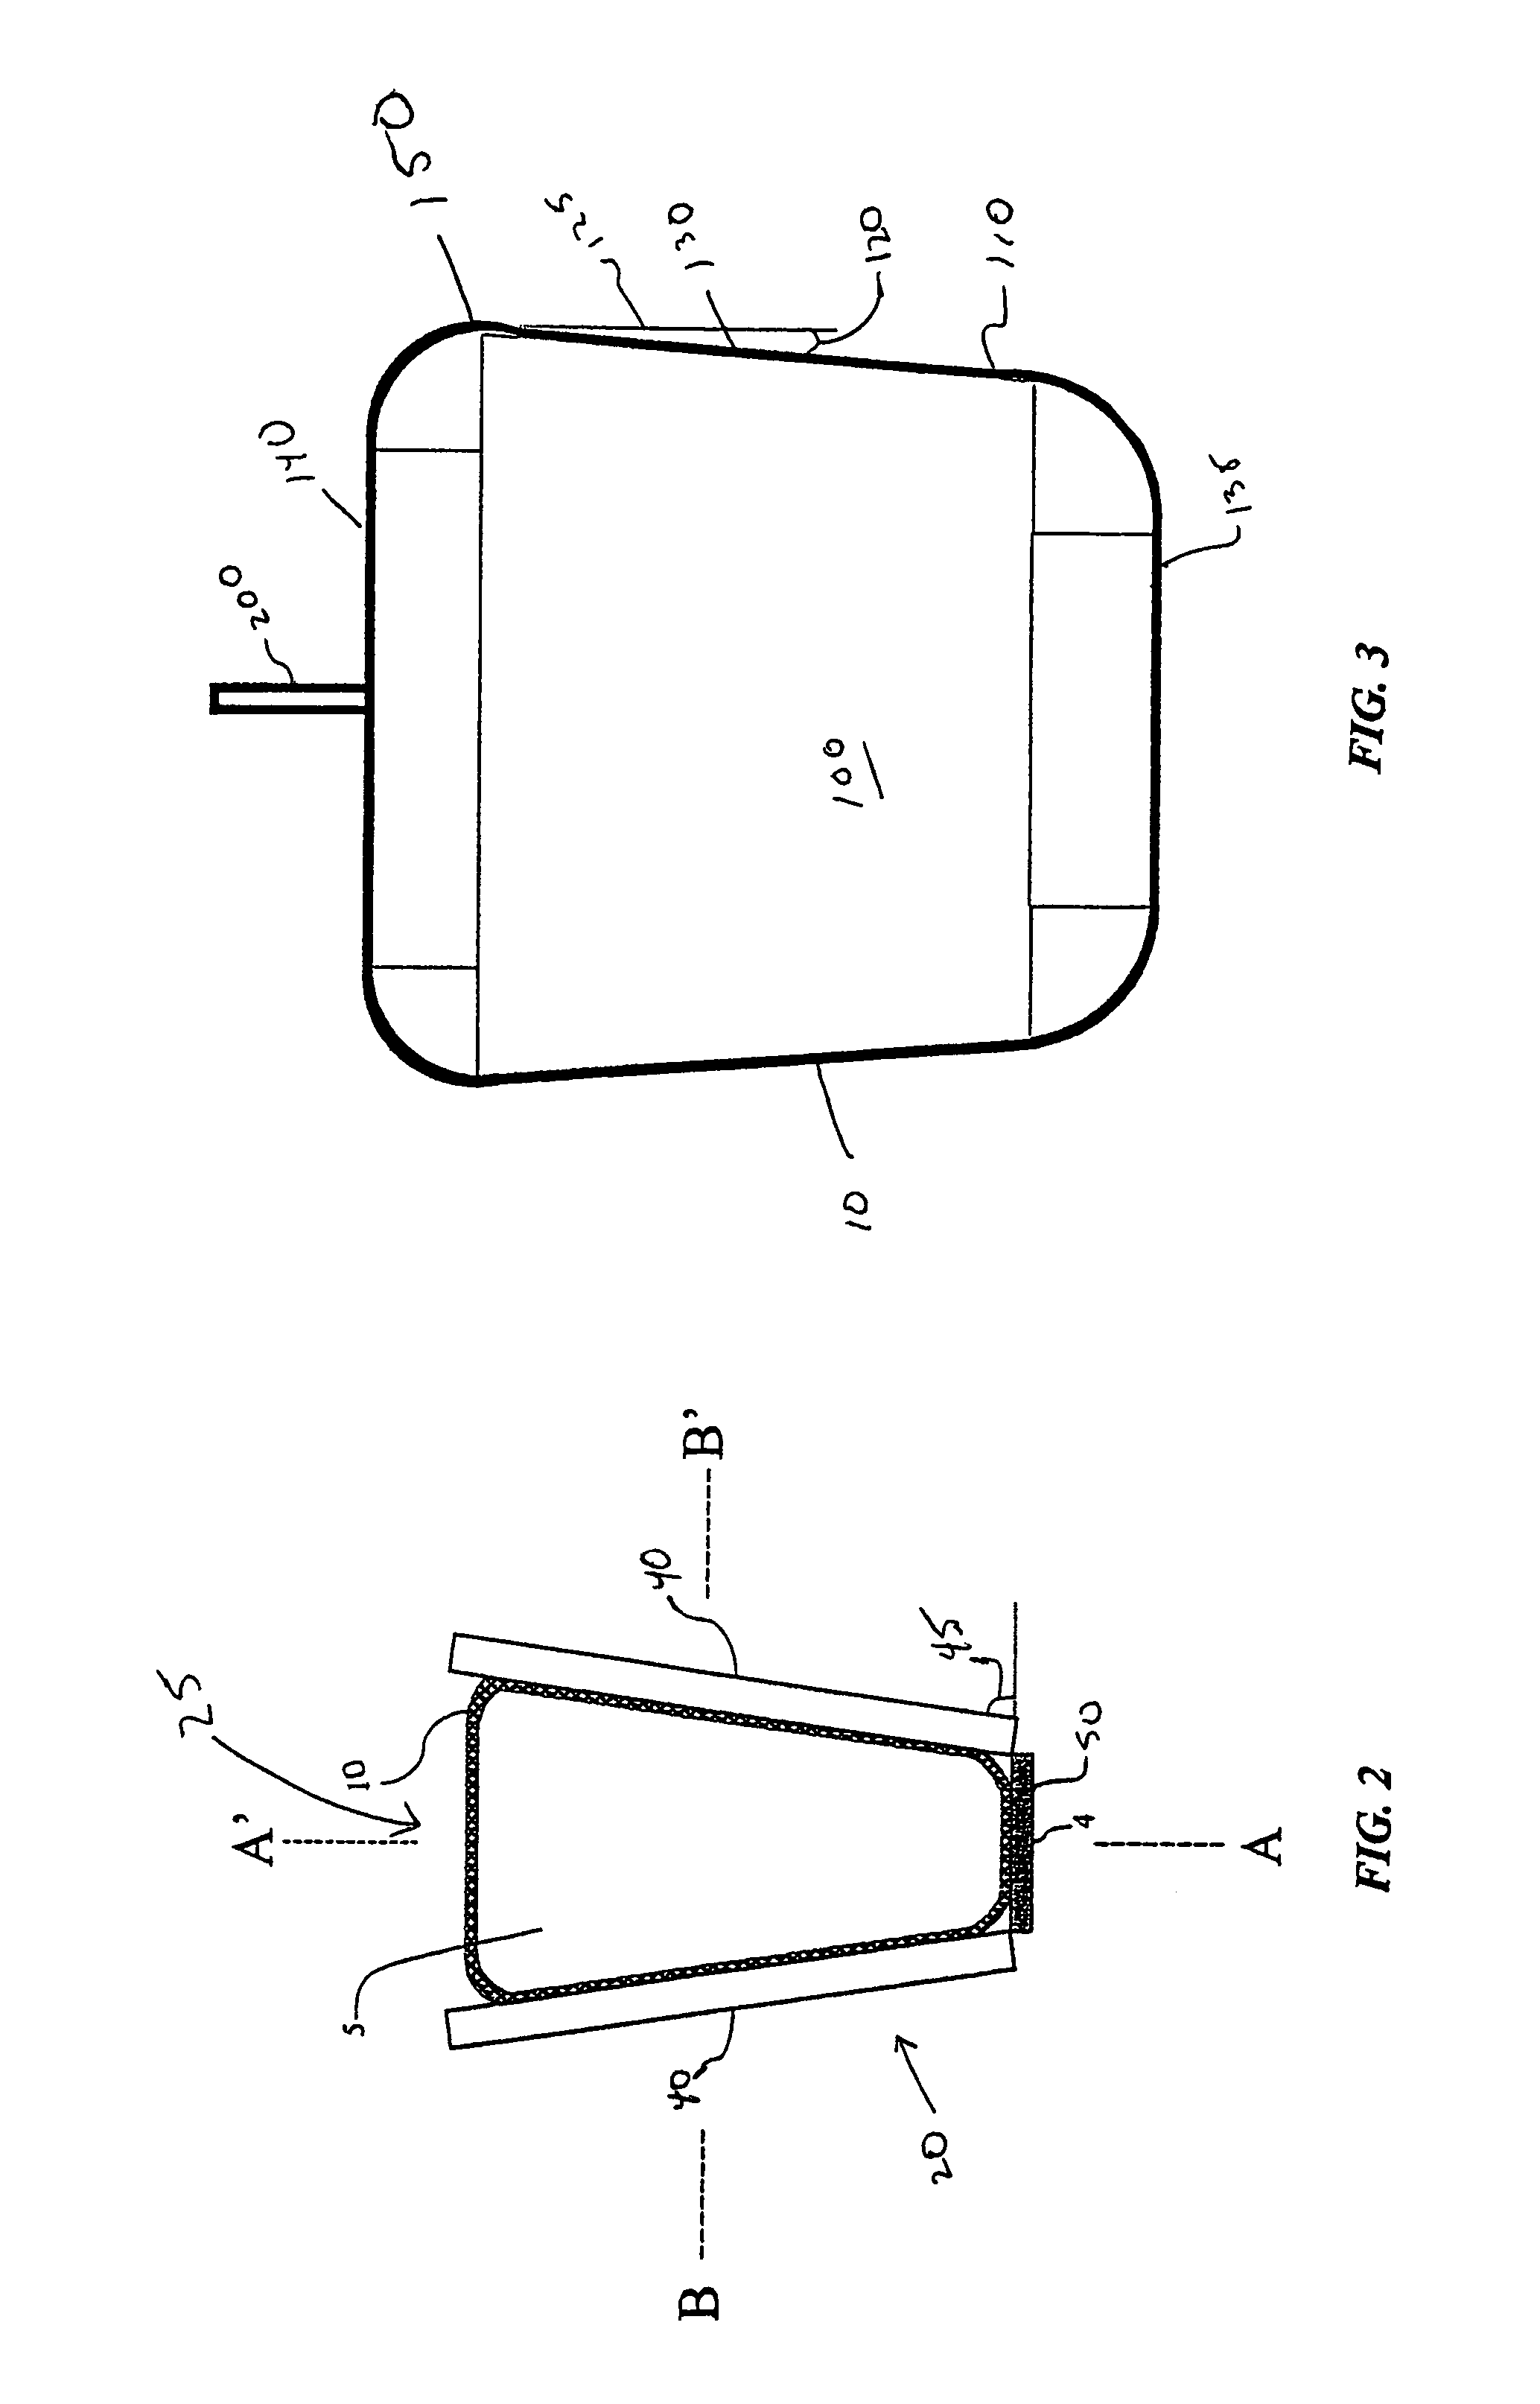 Systems and methods for freezing and storing biopharmaceutical material